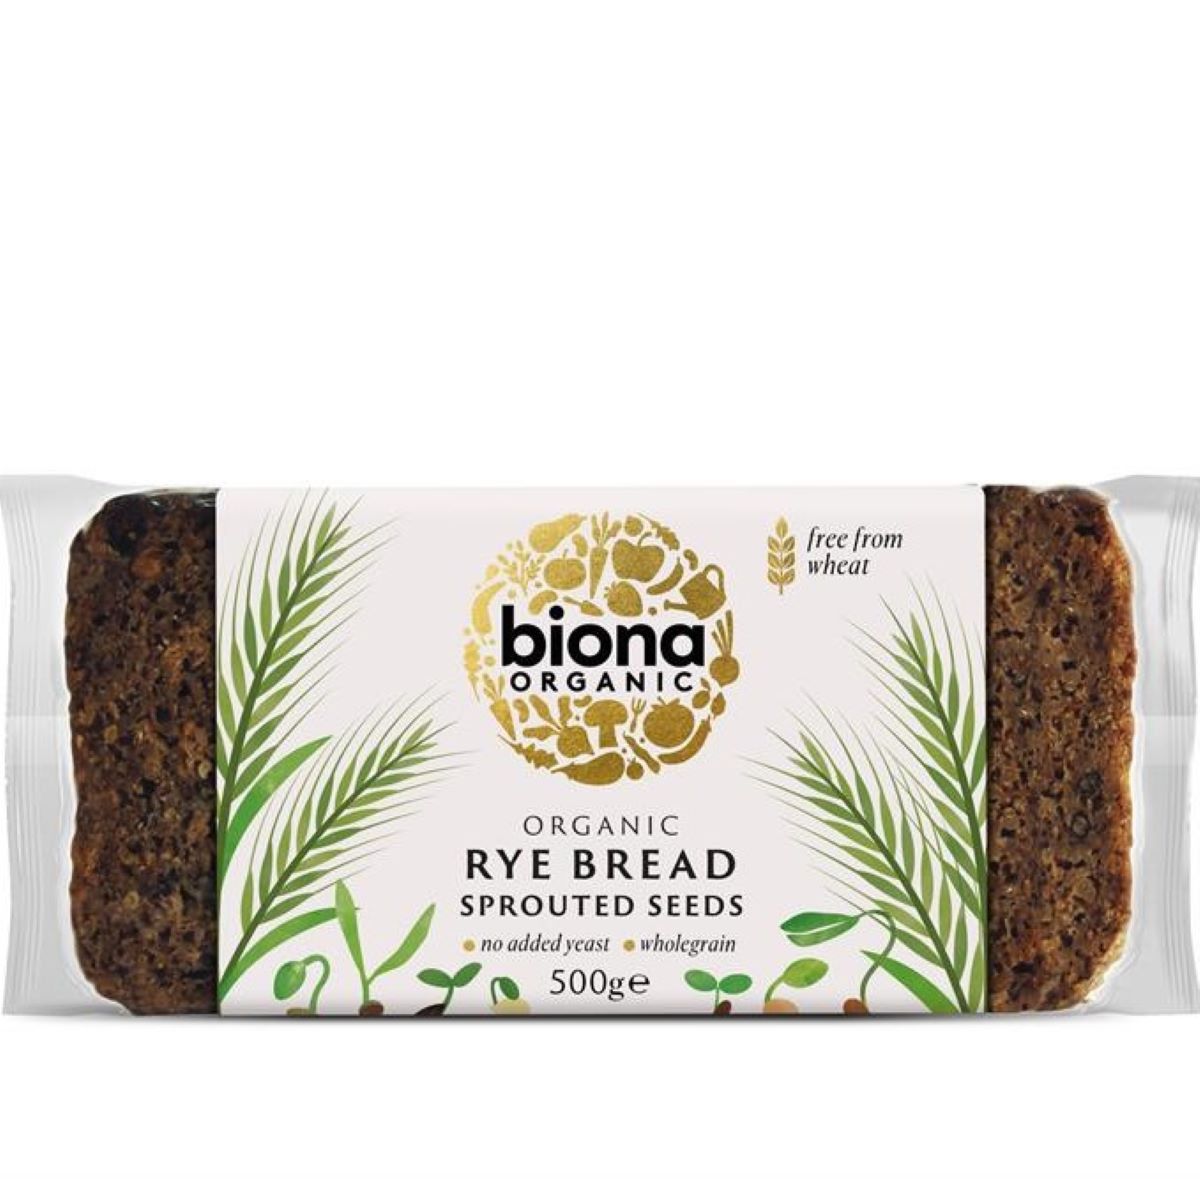 Biona Organic Rye Bread with Sprouted Seeds 500g